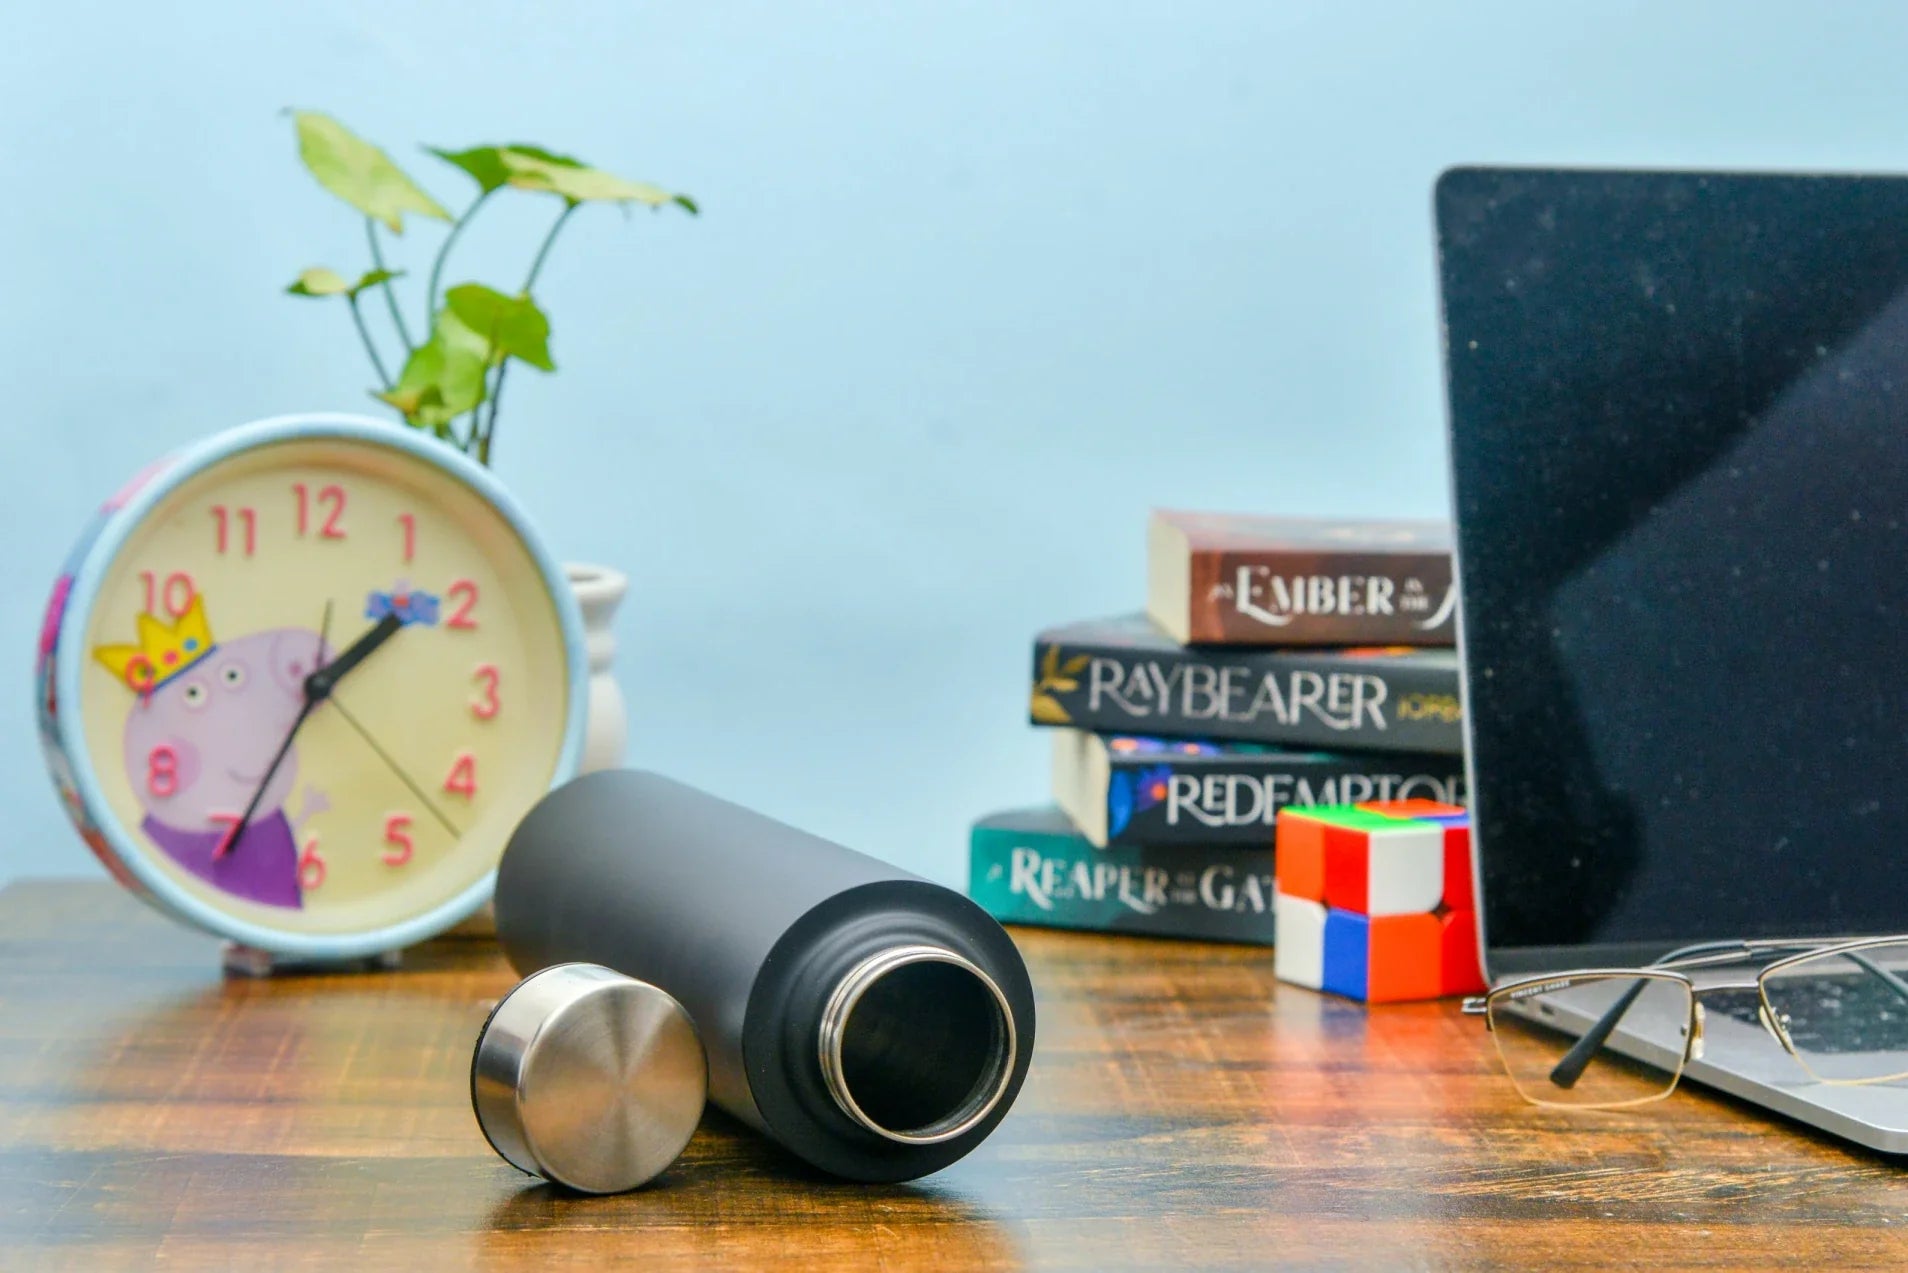 Our thermos bottle is crafted with a unique and modern design. Gone are the days of old and boring flasks. Guaranteed to impress your colleagues, friends & family